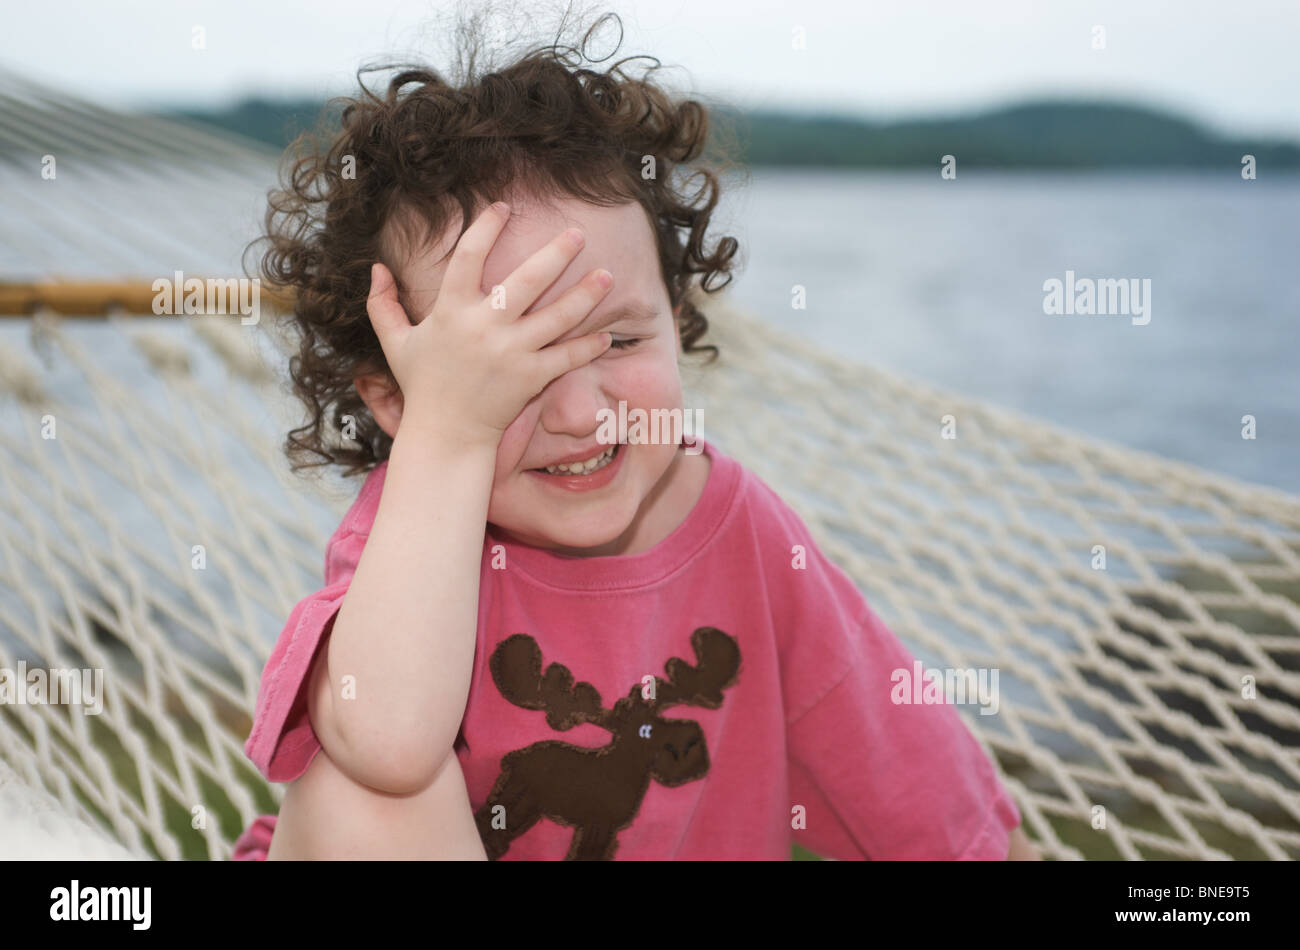 cute little girl sitting on a hammock, laughing and slapping her hand to her forehead Stock Photo